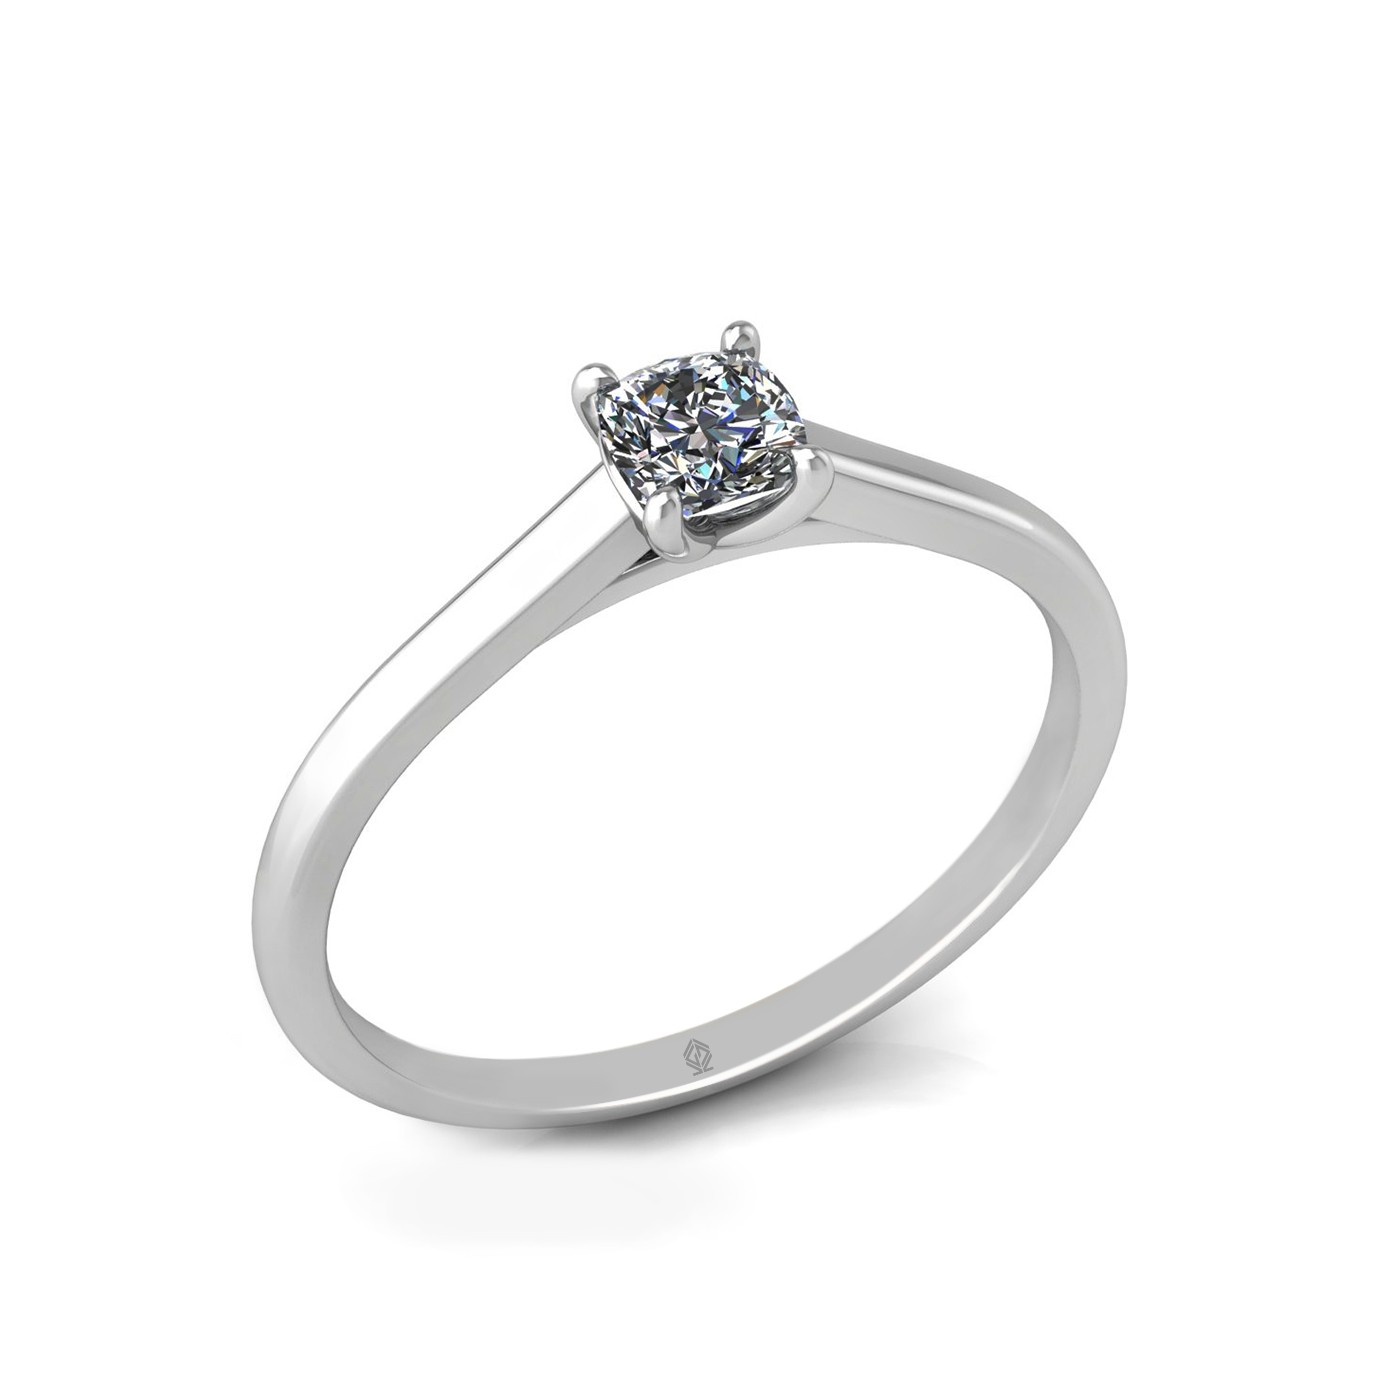 18k white gold  0,30 ct 4 prongs solitaire cushion cut diamond engagement ring with whisper thin band